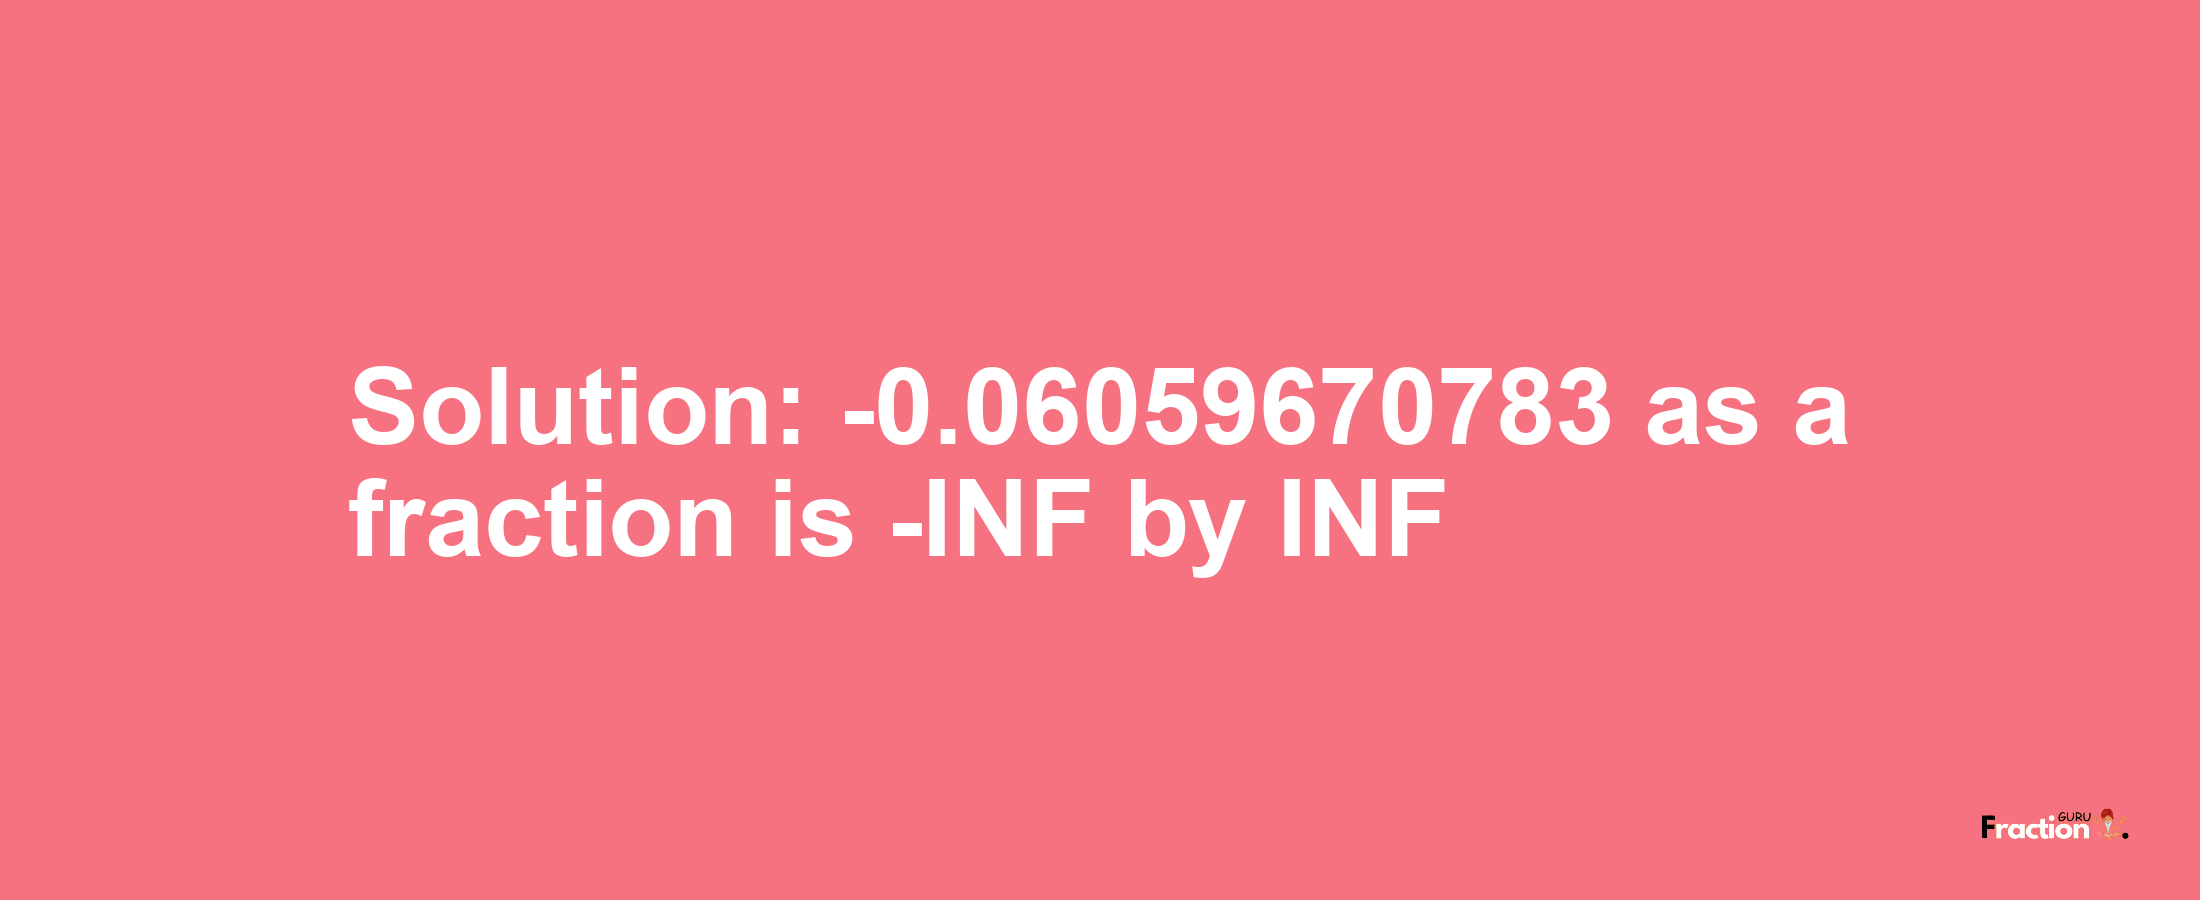 Solution:-0.06059670783 as a fraction is -INF/INF